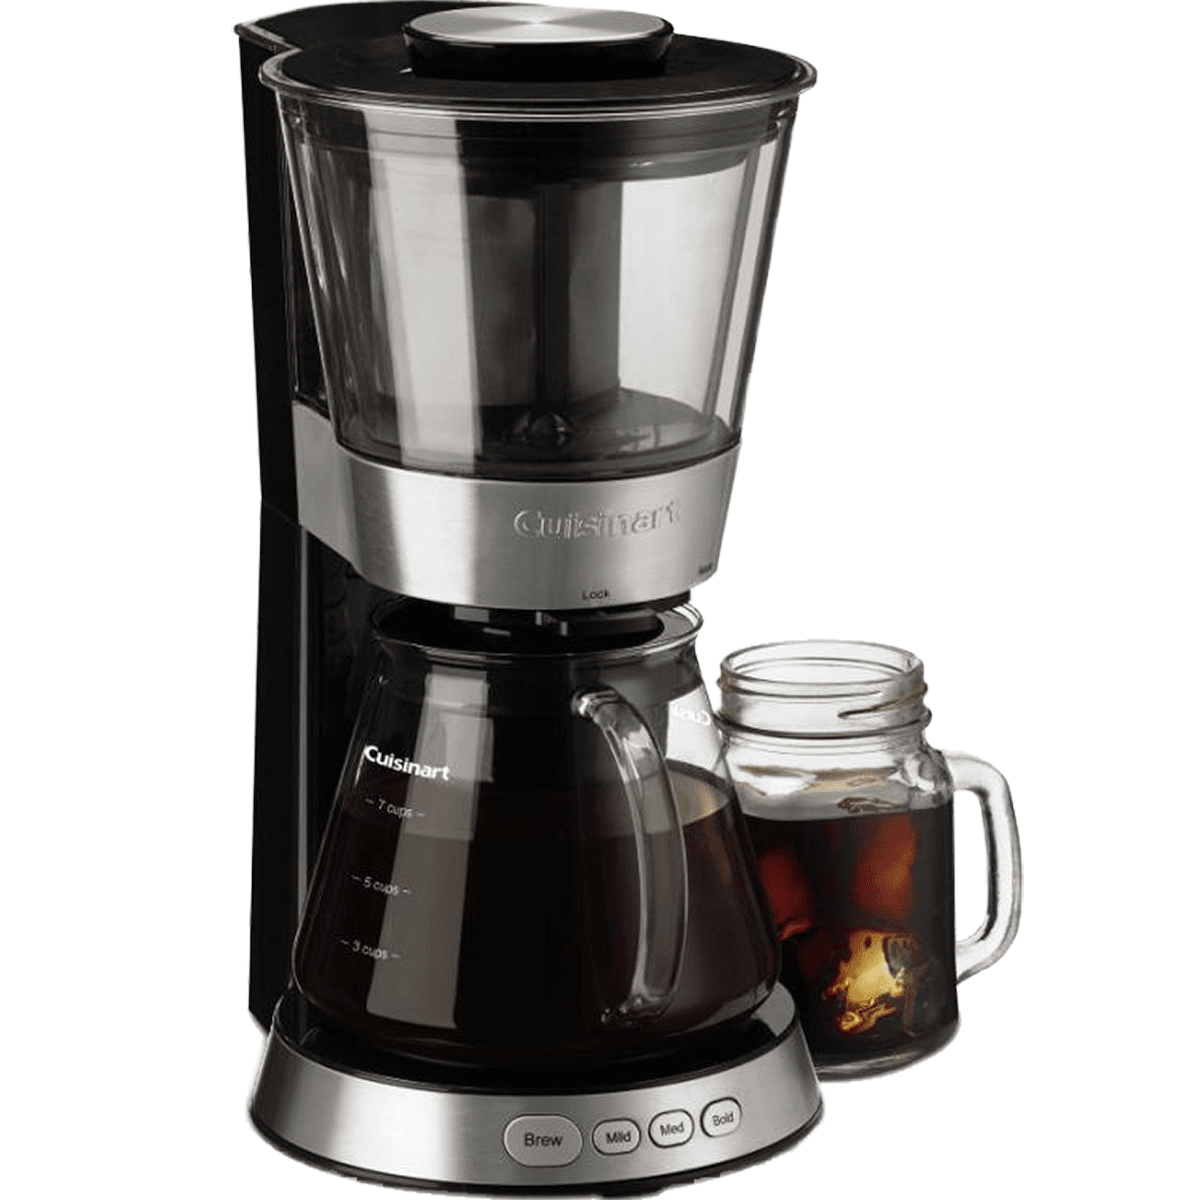 Cuisinart Automatic Cold Brew Coffee Maker (dcb-10)